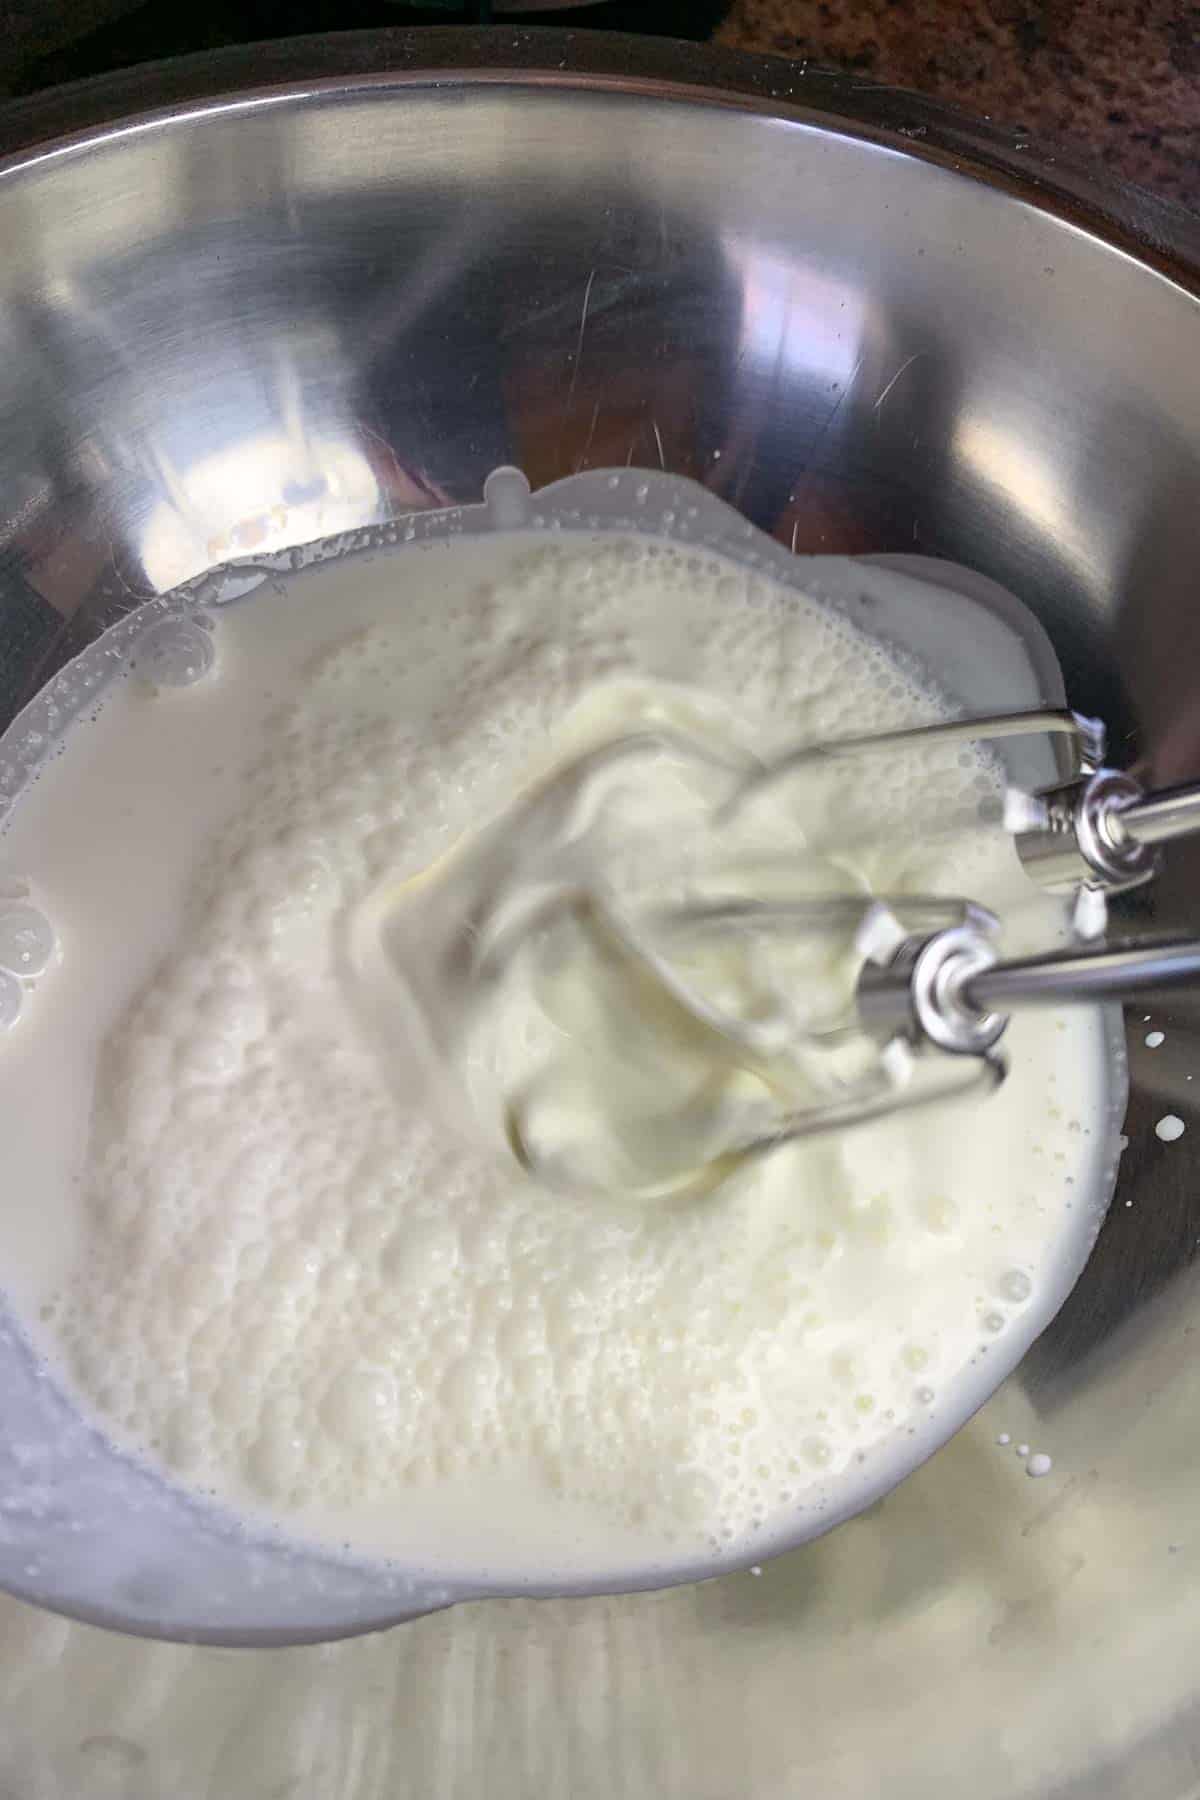 Cream being whipped in a metal bowl using a hand mixer.